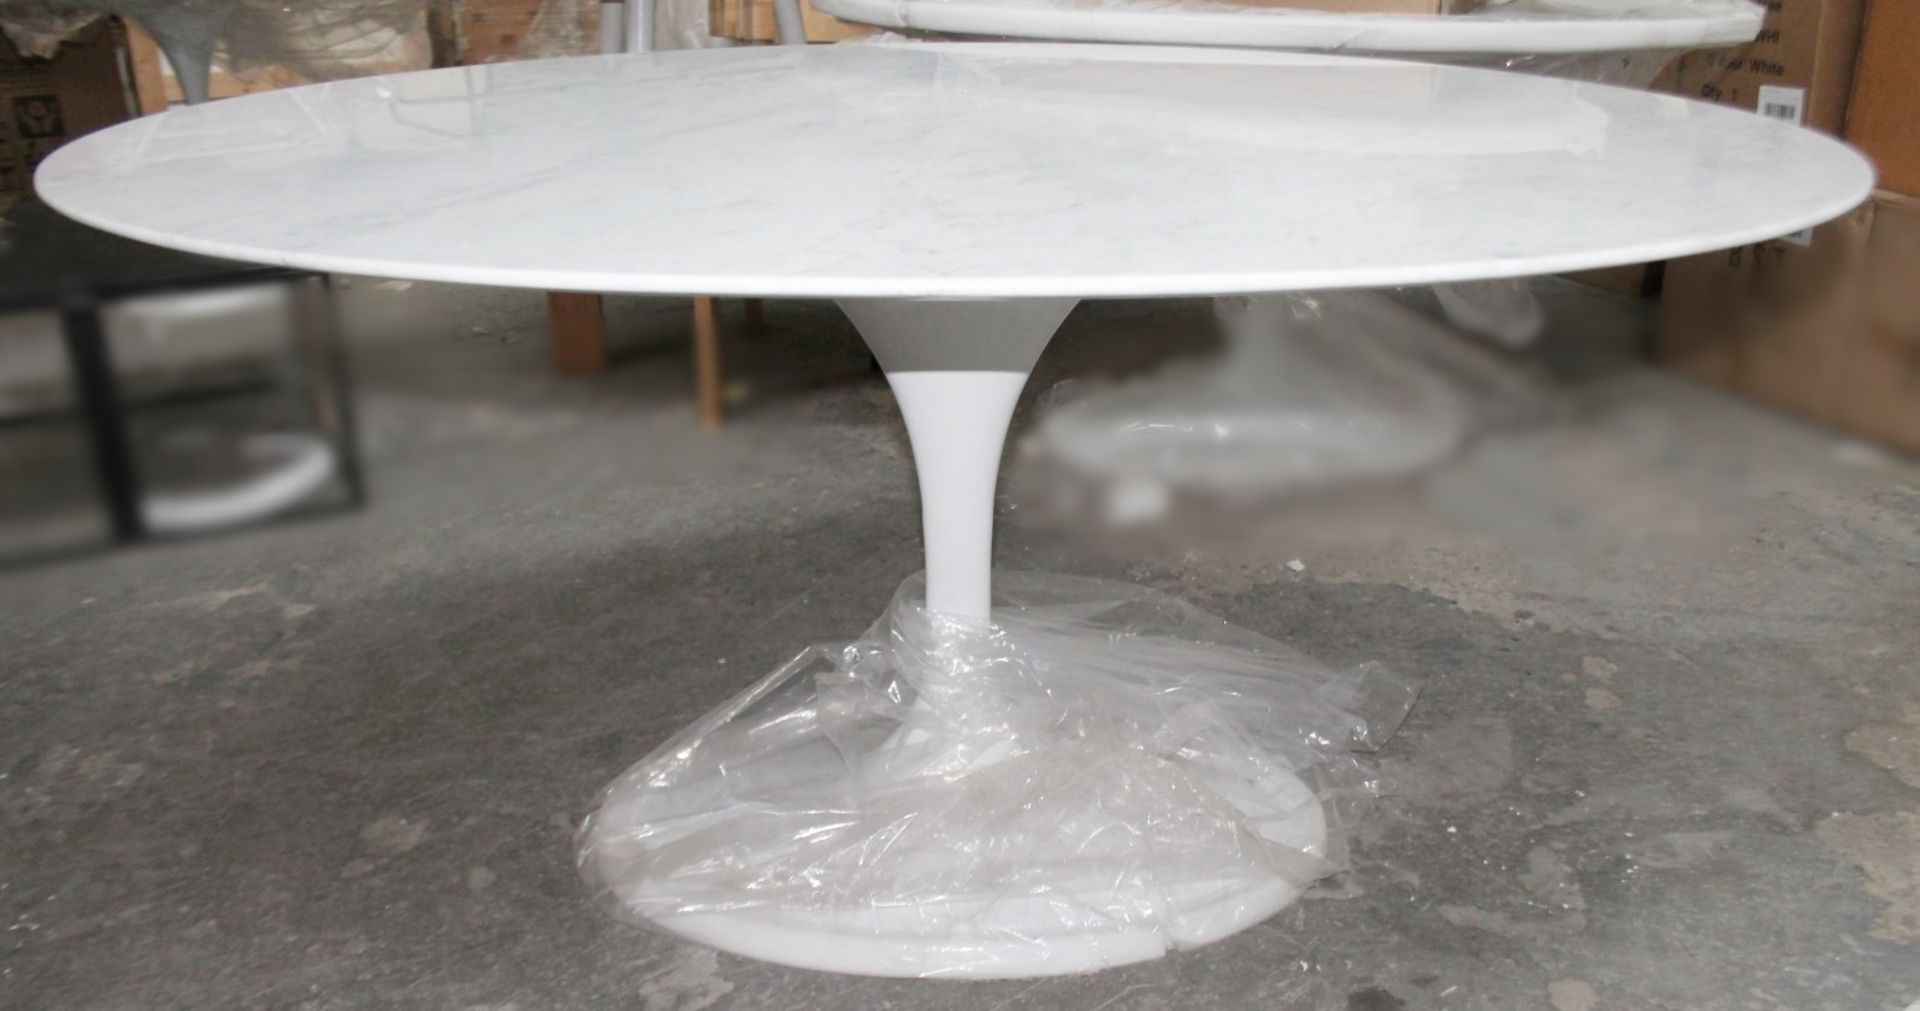 1 x Eero Saarinen Inspired Large Oval Carrara Marble-Topped Dining Table - H74cm x W150 x D120cm - Image 3 of 6